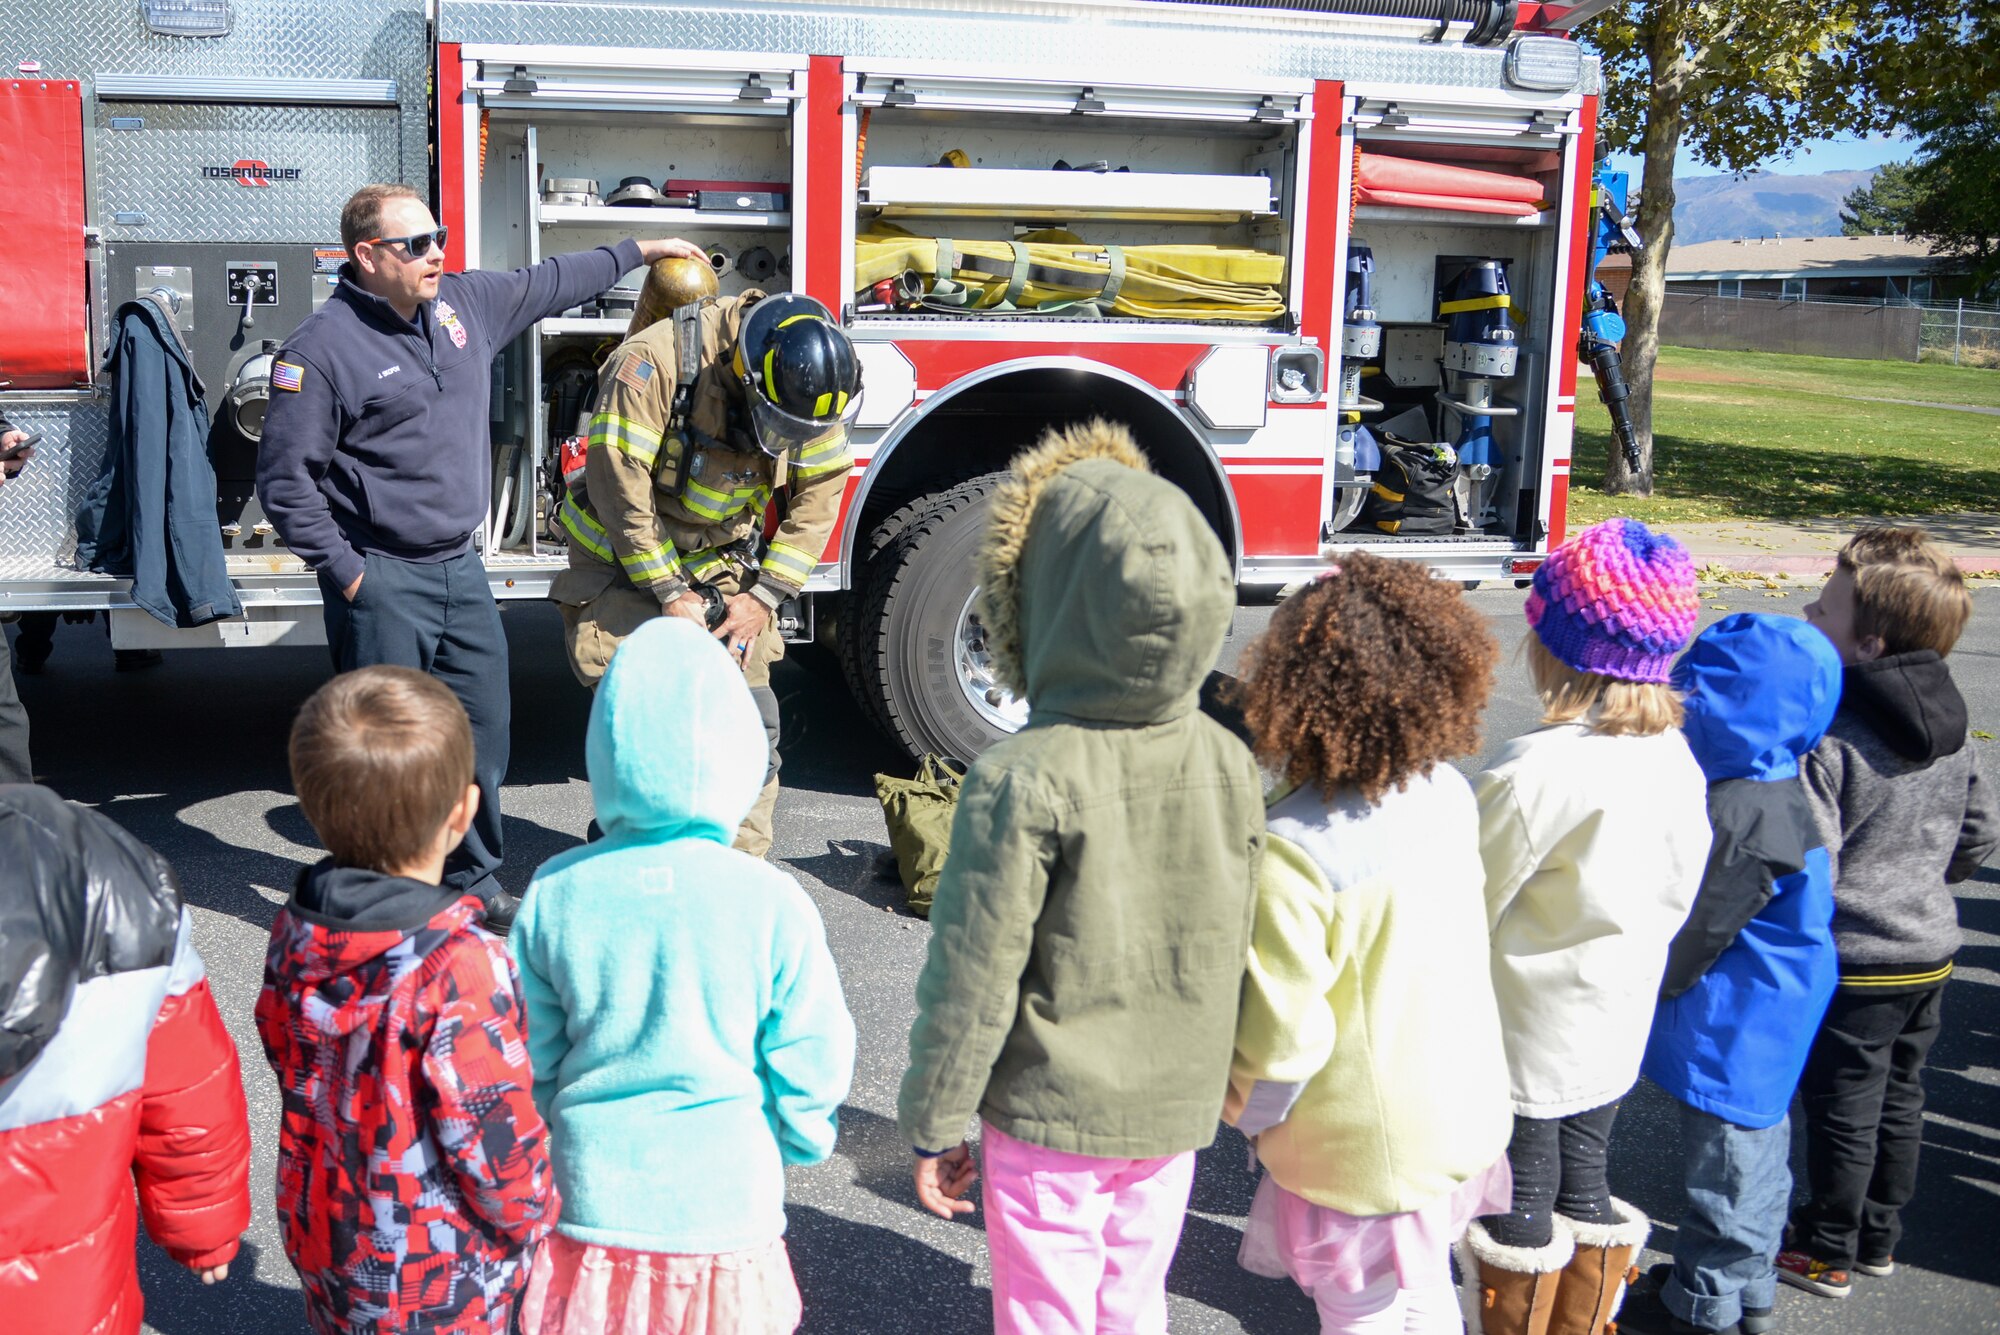 (Left to right) Jeffrey Skopow and Reagan Marcotte, Fire and Emergency Services at Hill Air Force Base, Utah, demonstrate firefighting equipment for Hill Field Elementary students Oct. 10, 2019, in front of the department’s fire engine. This was one of the numerous outreach events base firefighters sponsored for Fire Prevention Week Oct. 6-12. (U.S. Air Force photo by Cynthia Griggs)